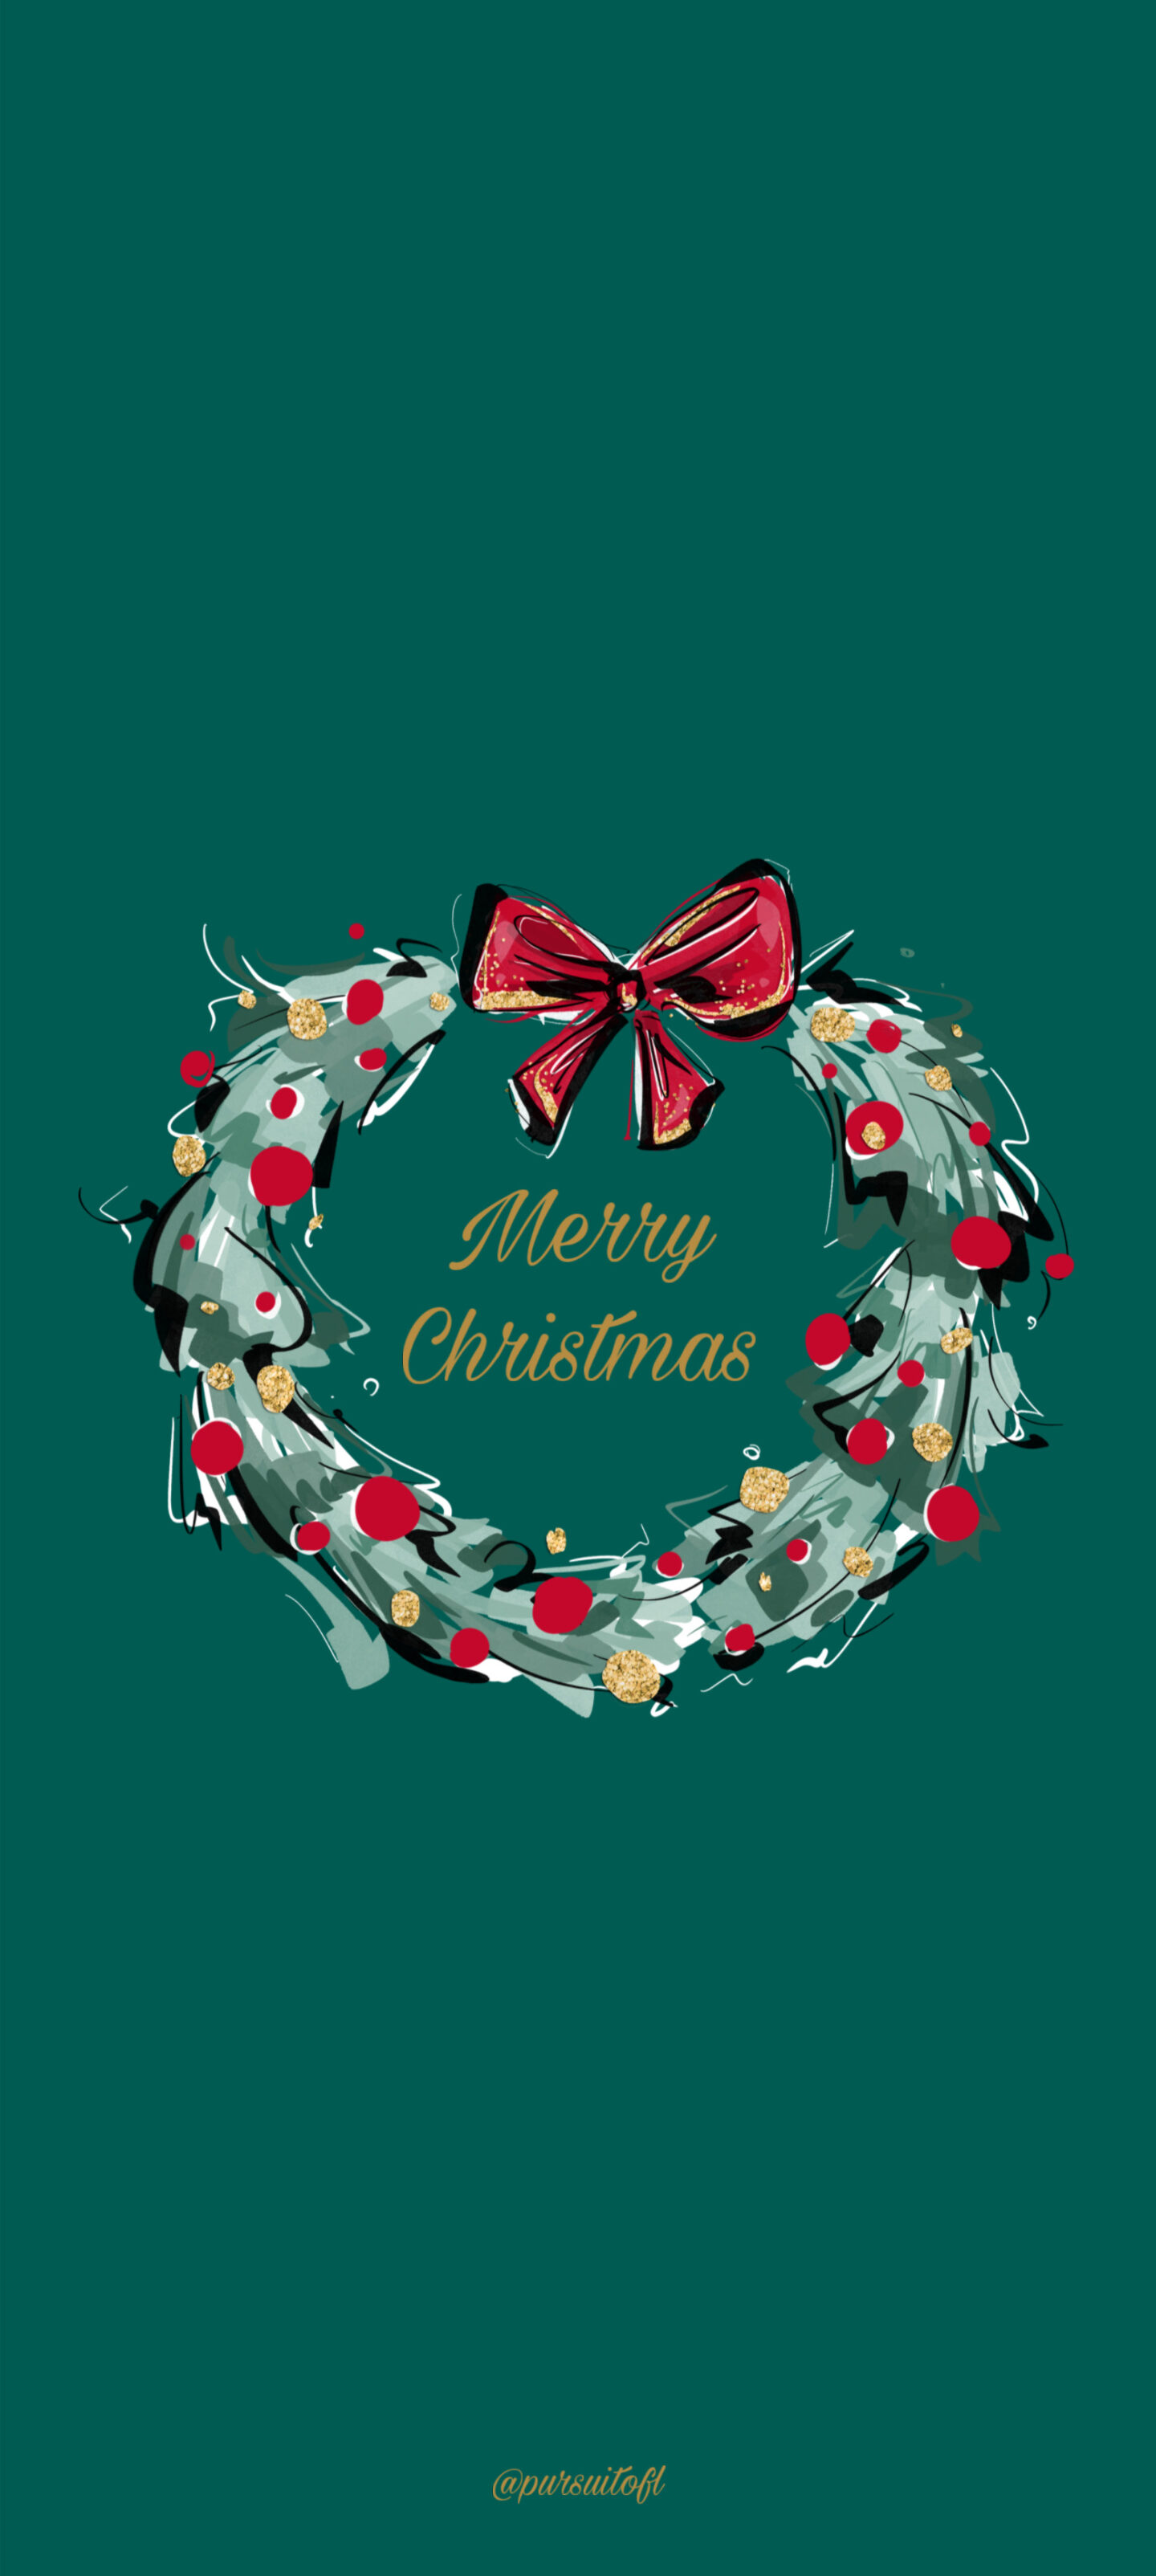 Forest green holiday phone wallpaper with Christmas wreath and Merry Christmas text